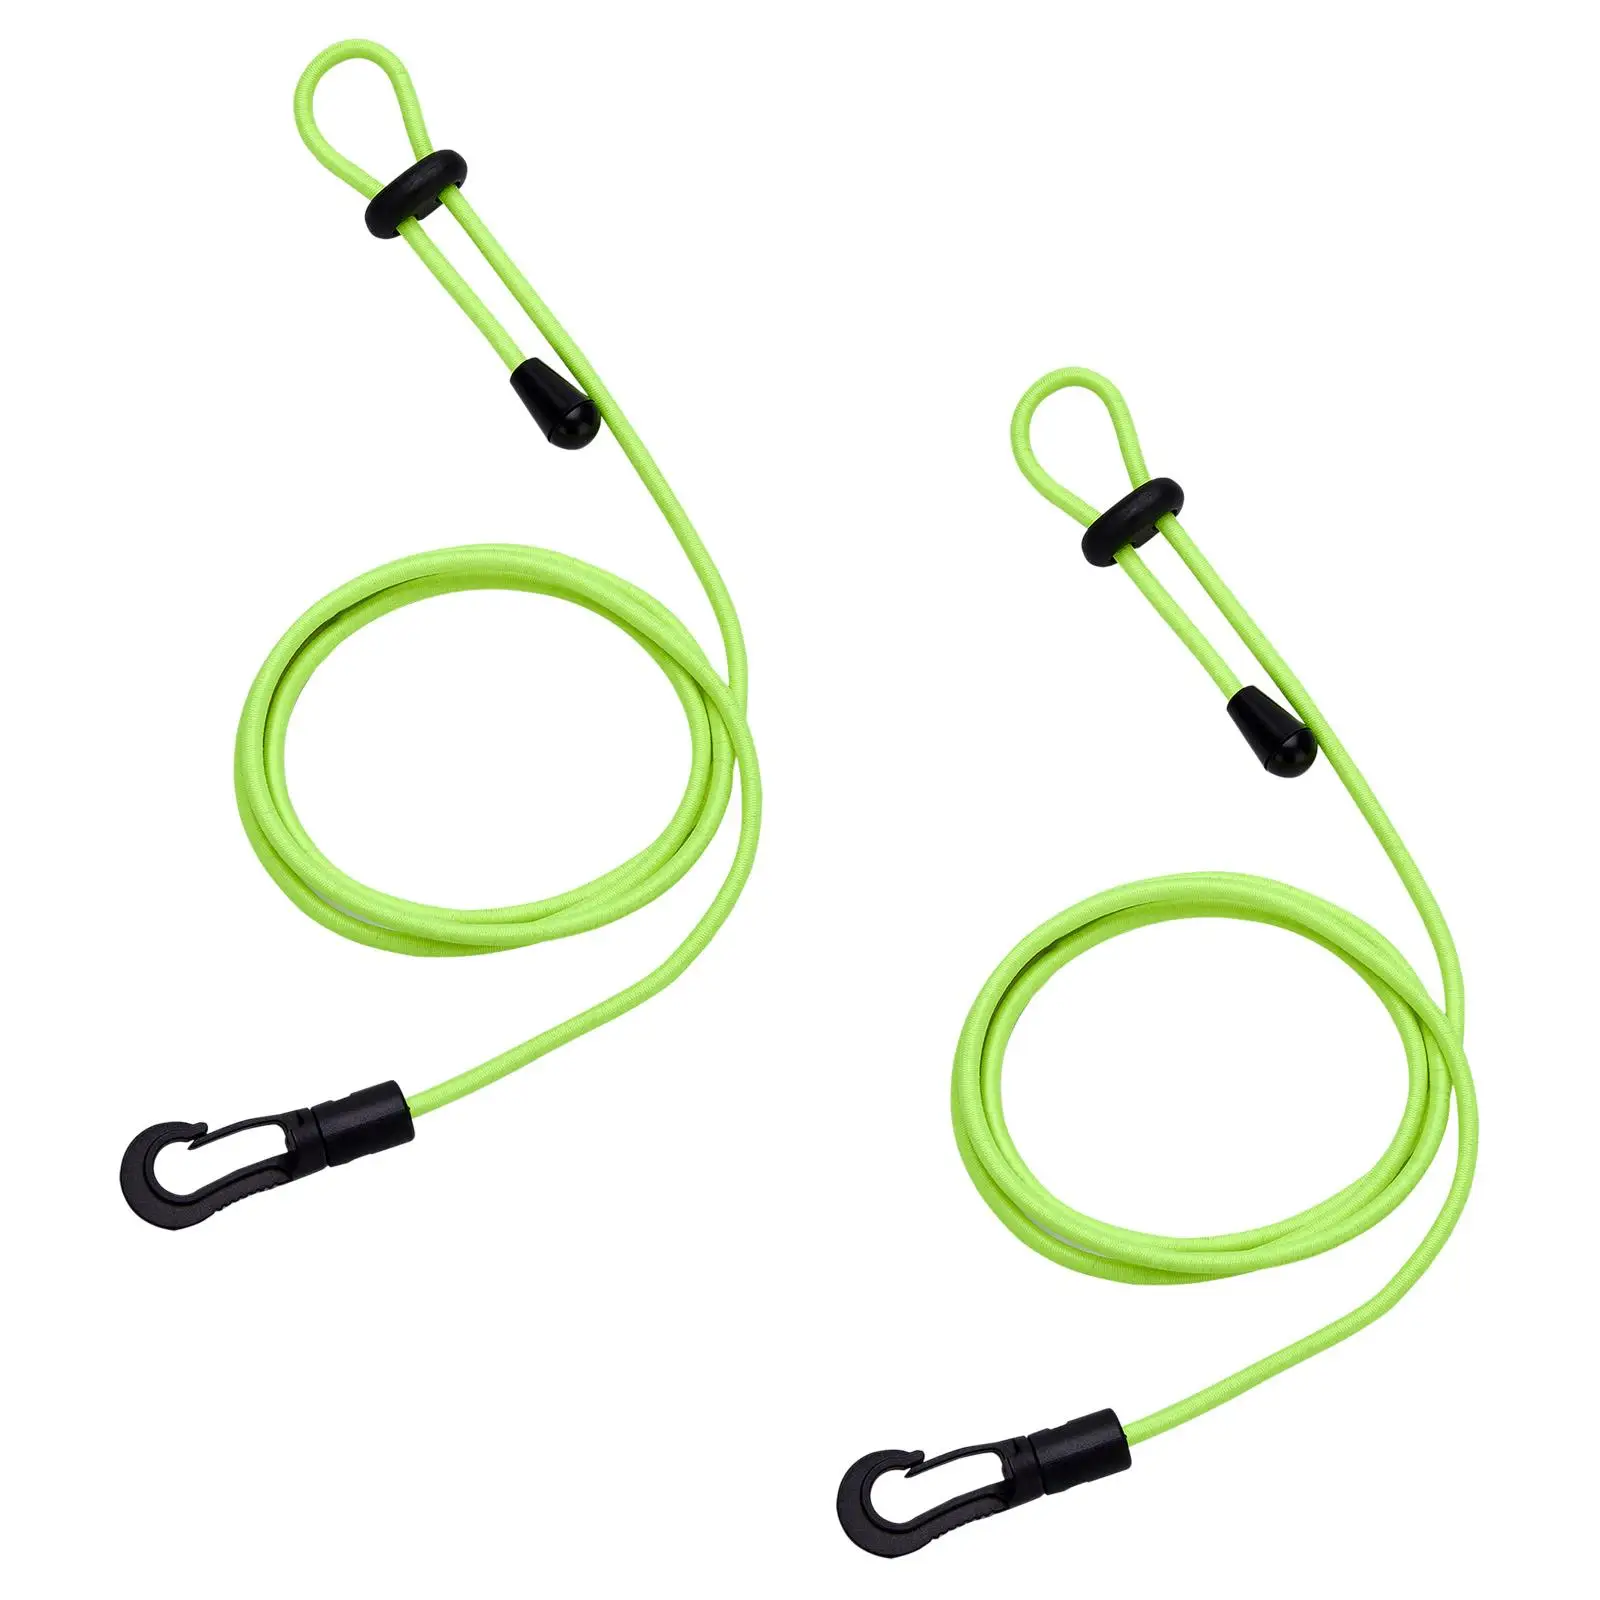 2 Pieces Kayak Paddle Leash Cord Safety Lanyard Strap for Canoe Paddle Fishing Rod Sturdy Easily Install Lightweight Adjustable